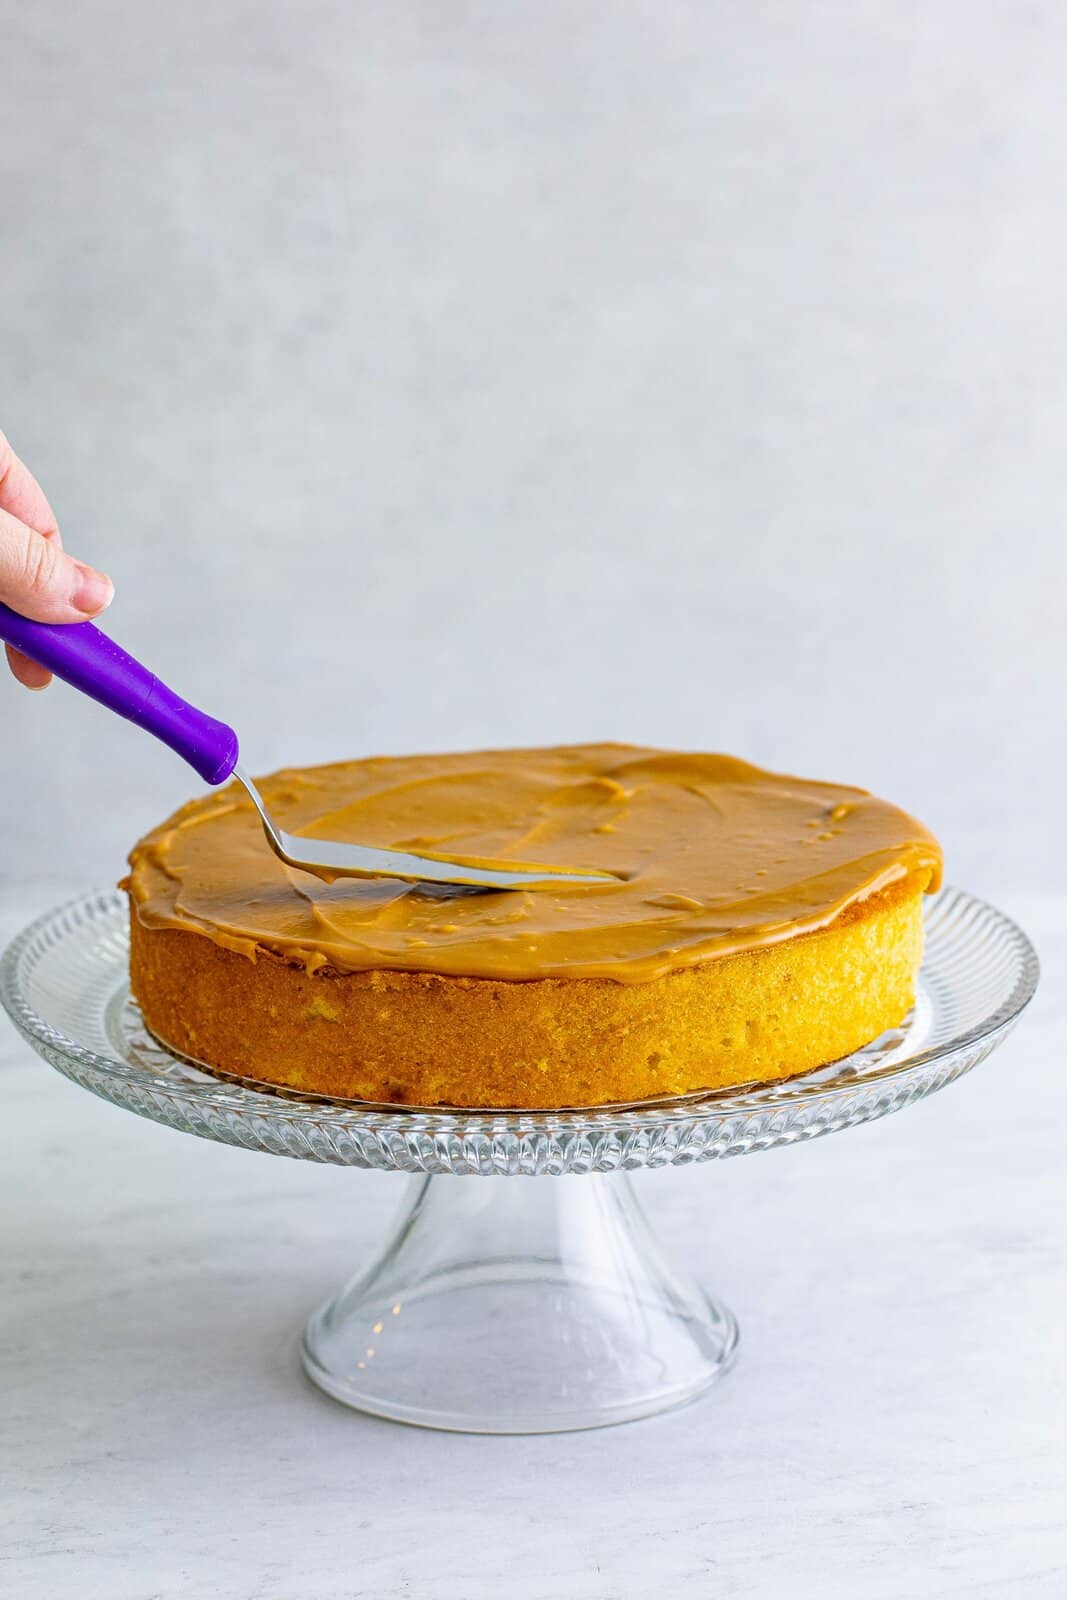 One cake layer being spread with caramel frosting.